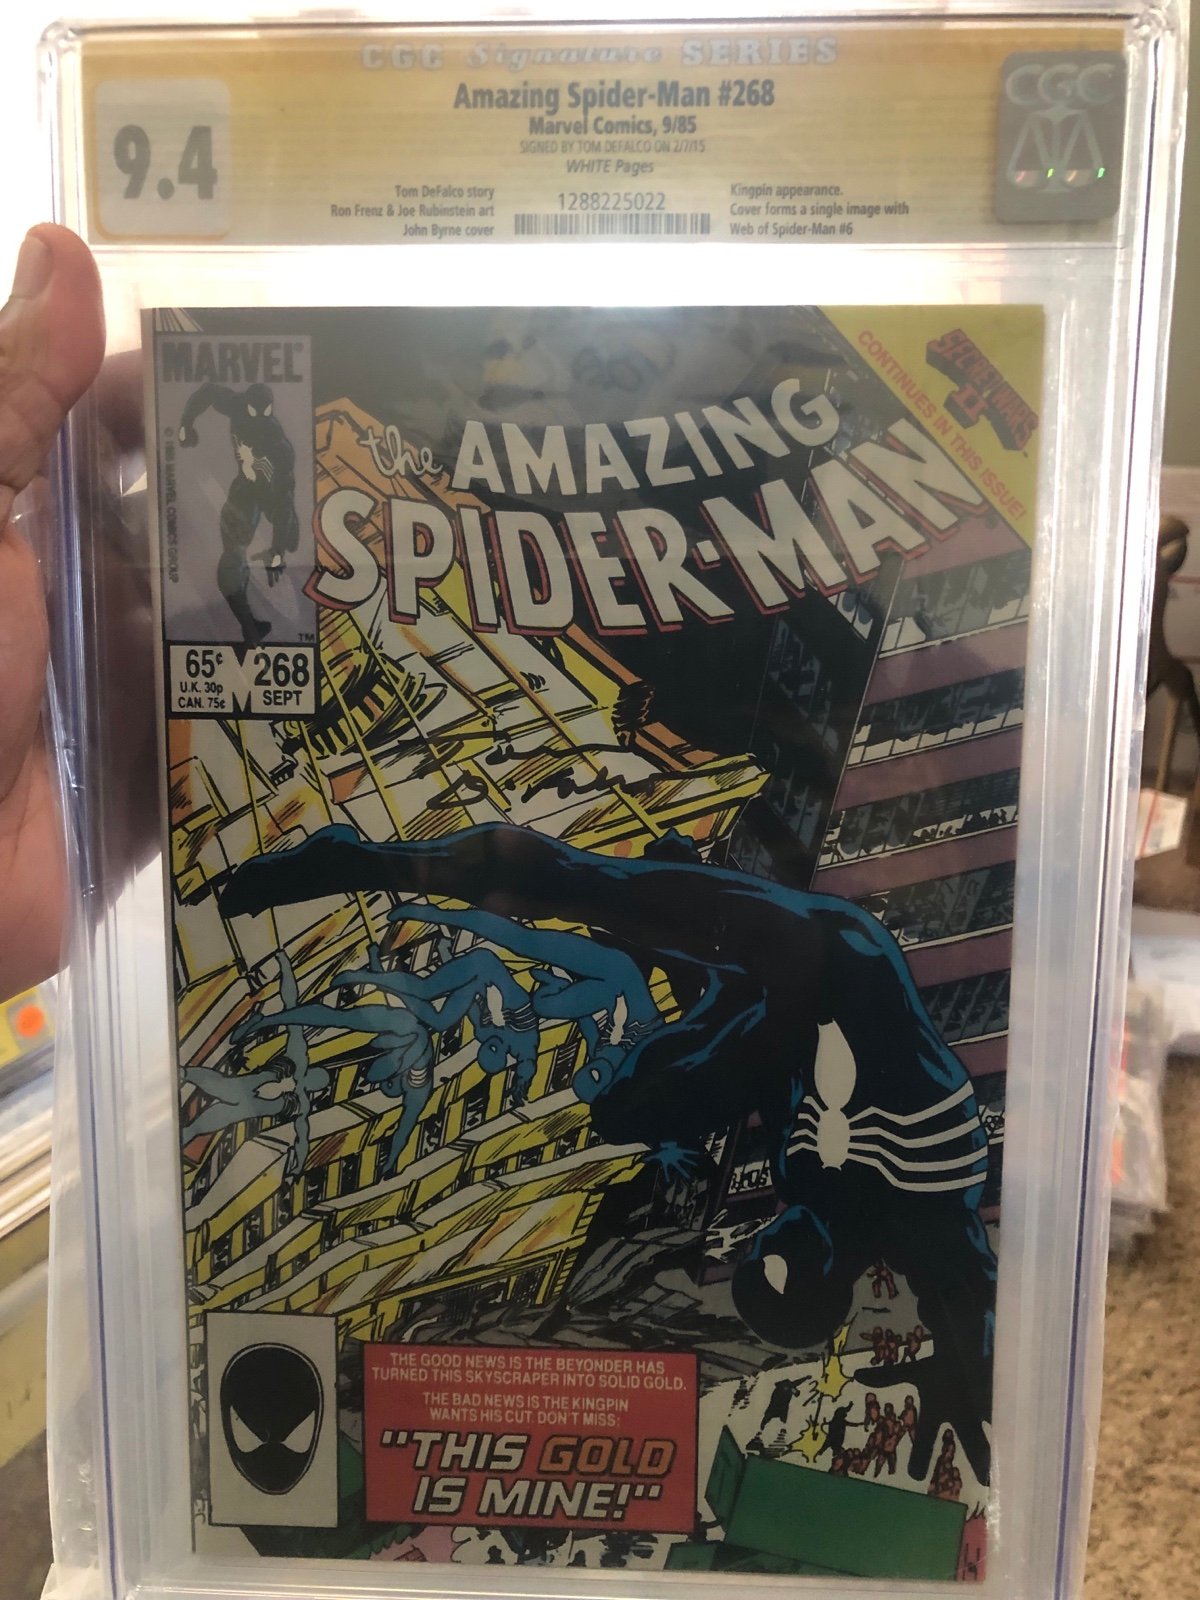 Amazing Spider-Man #268 09/1985 CGC 9.4 Signed By Tom D